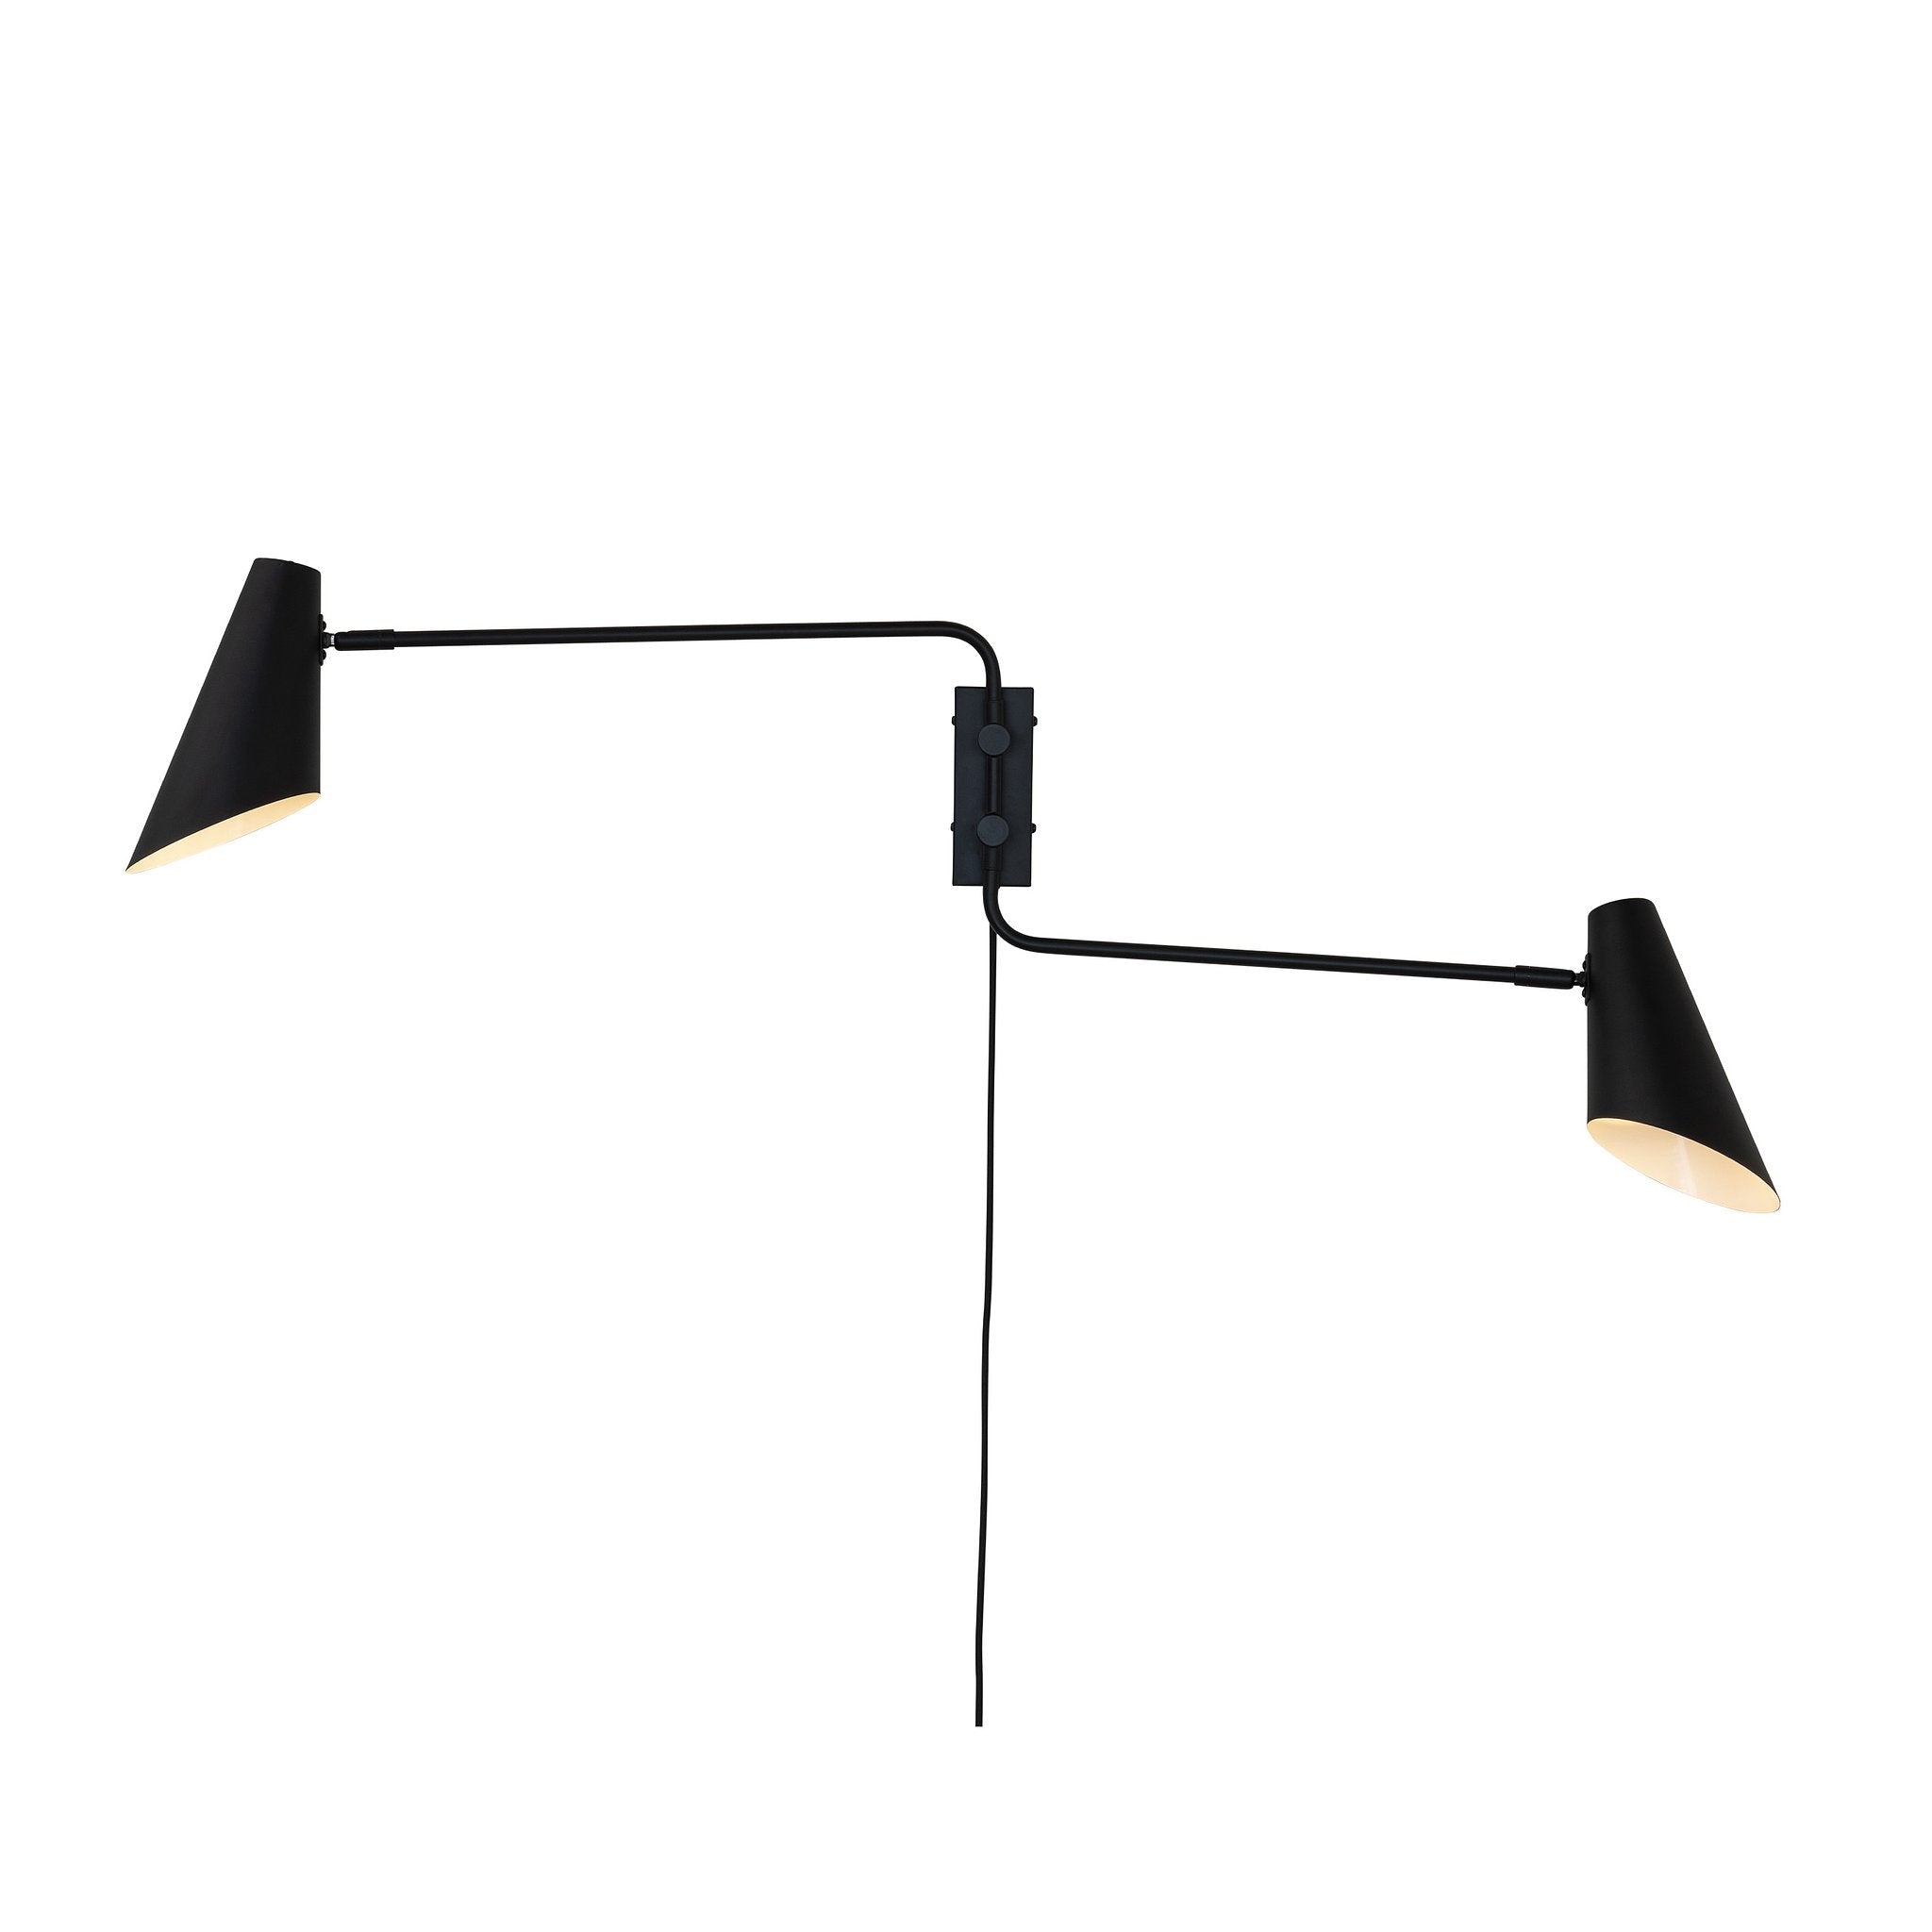 Cale black wall lamp, 2 arms